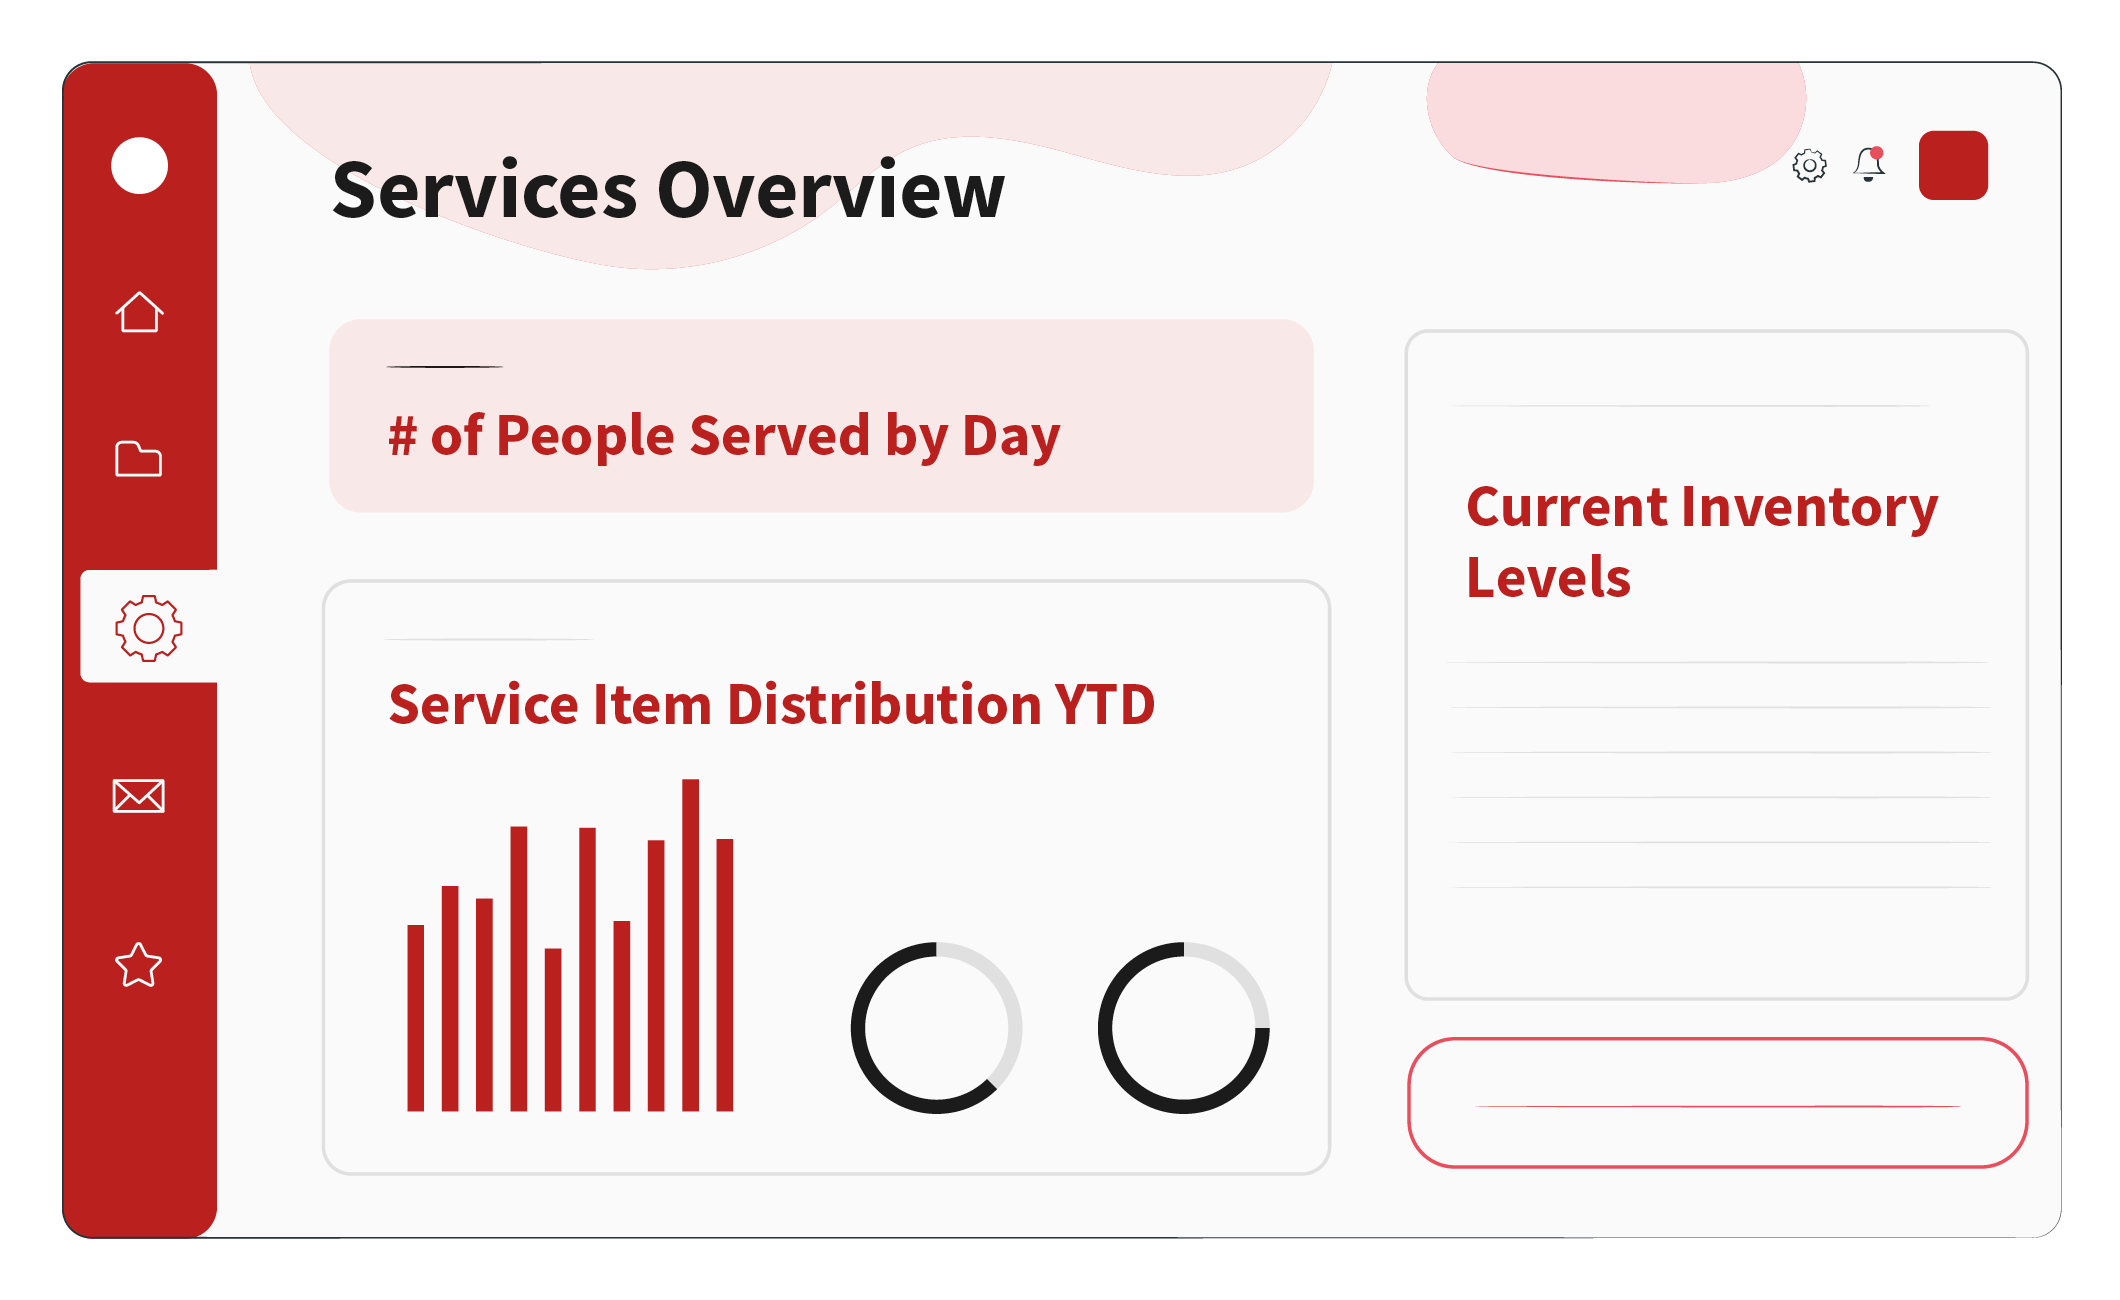 One of Salesforce’s nonprofit dashboard examples, showing how you can use a nonprofit KPI dashboard to monitor service delivery